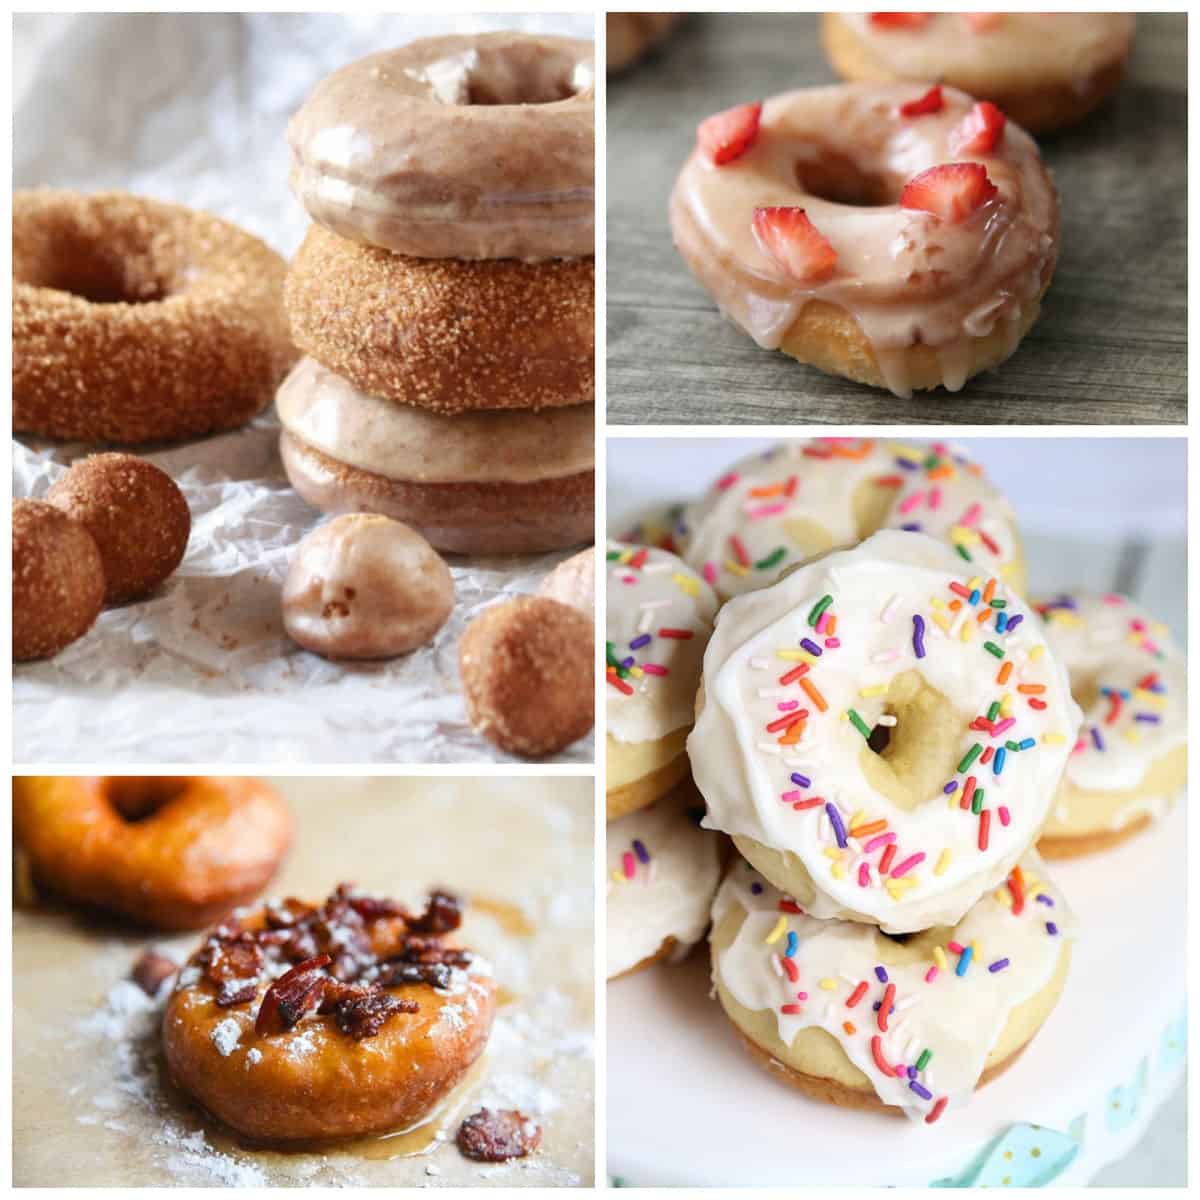 Collage of donut images, glazed, with sprinkles and toppings